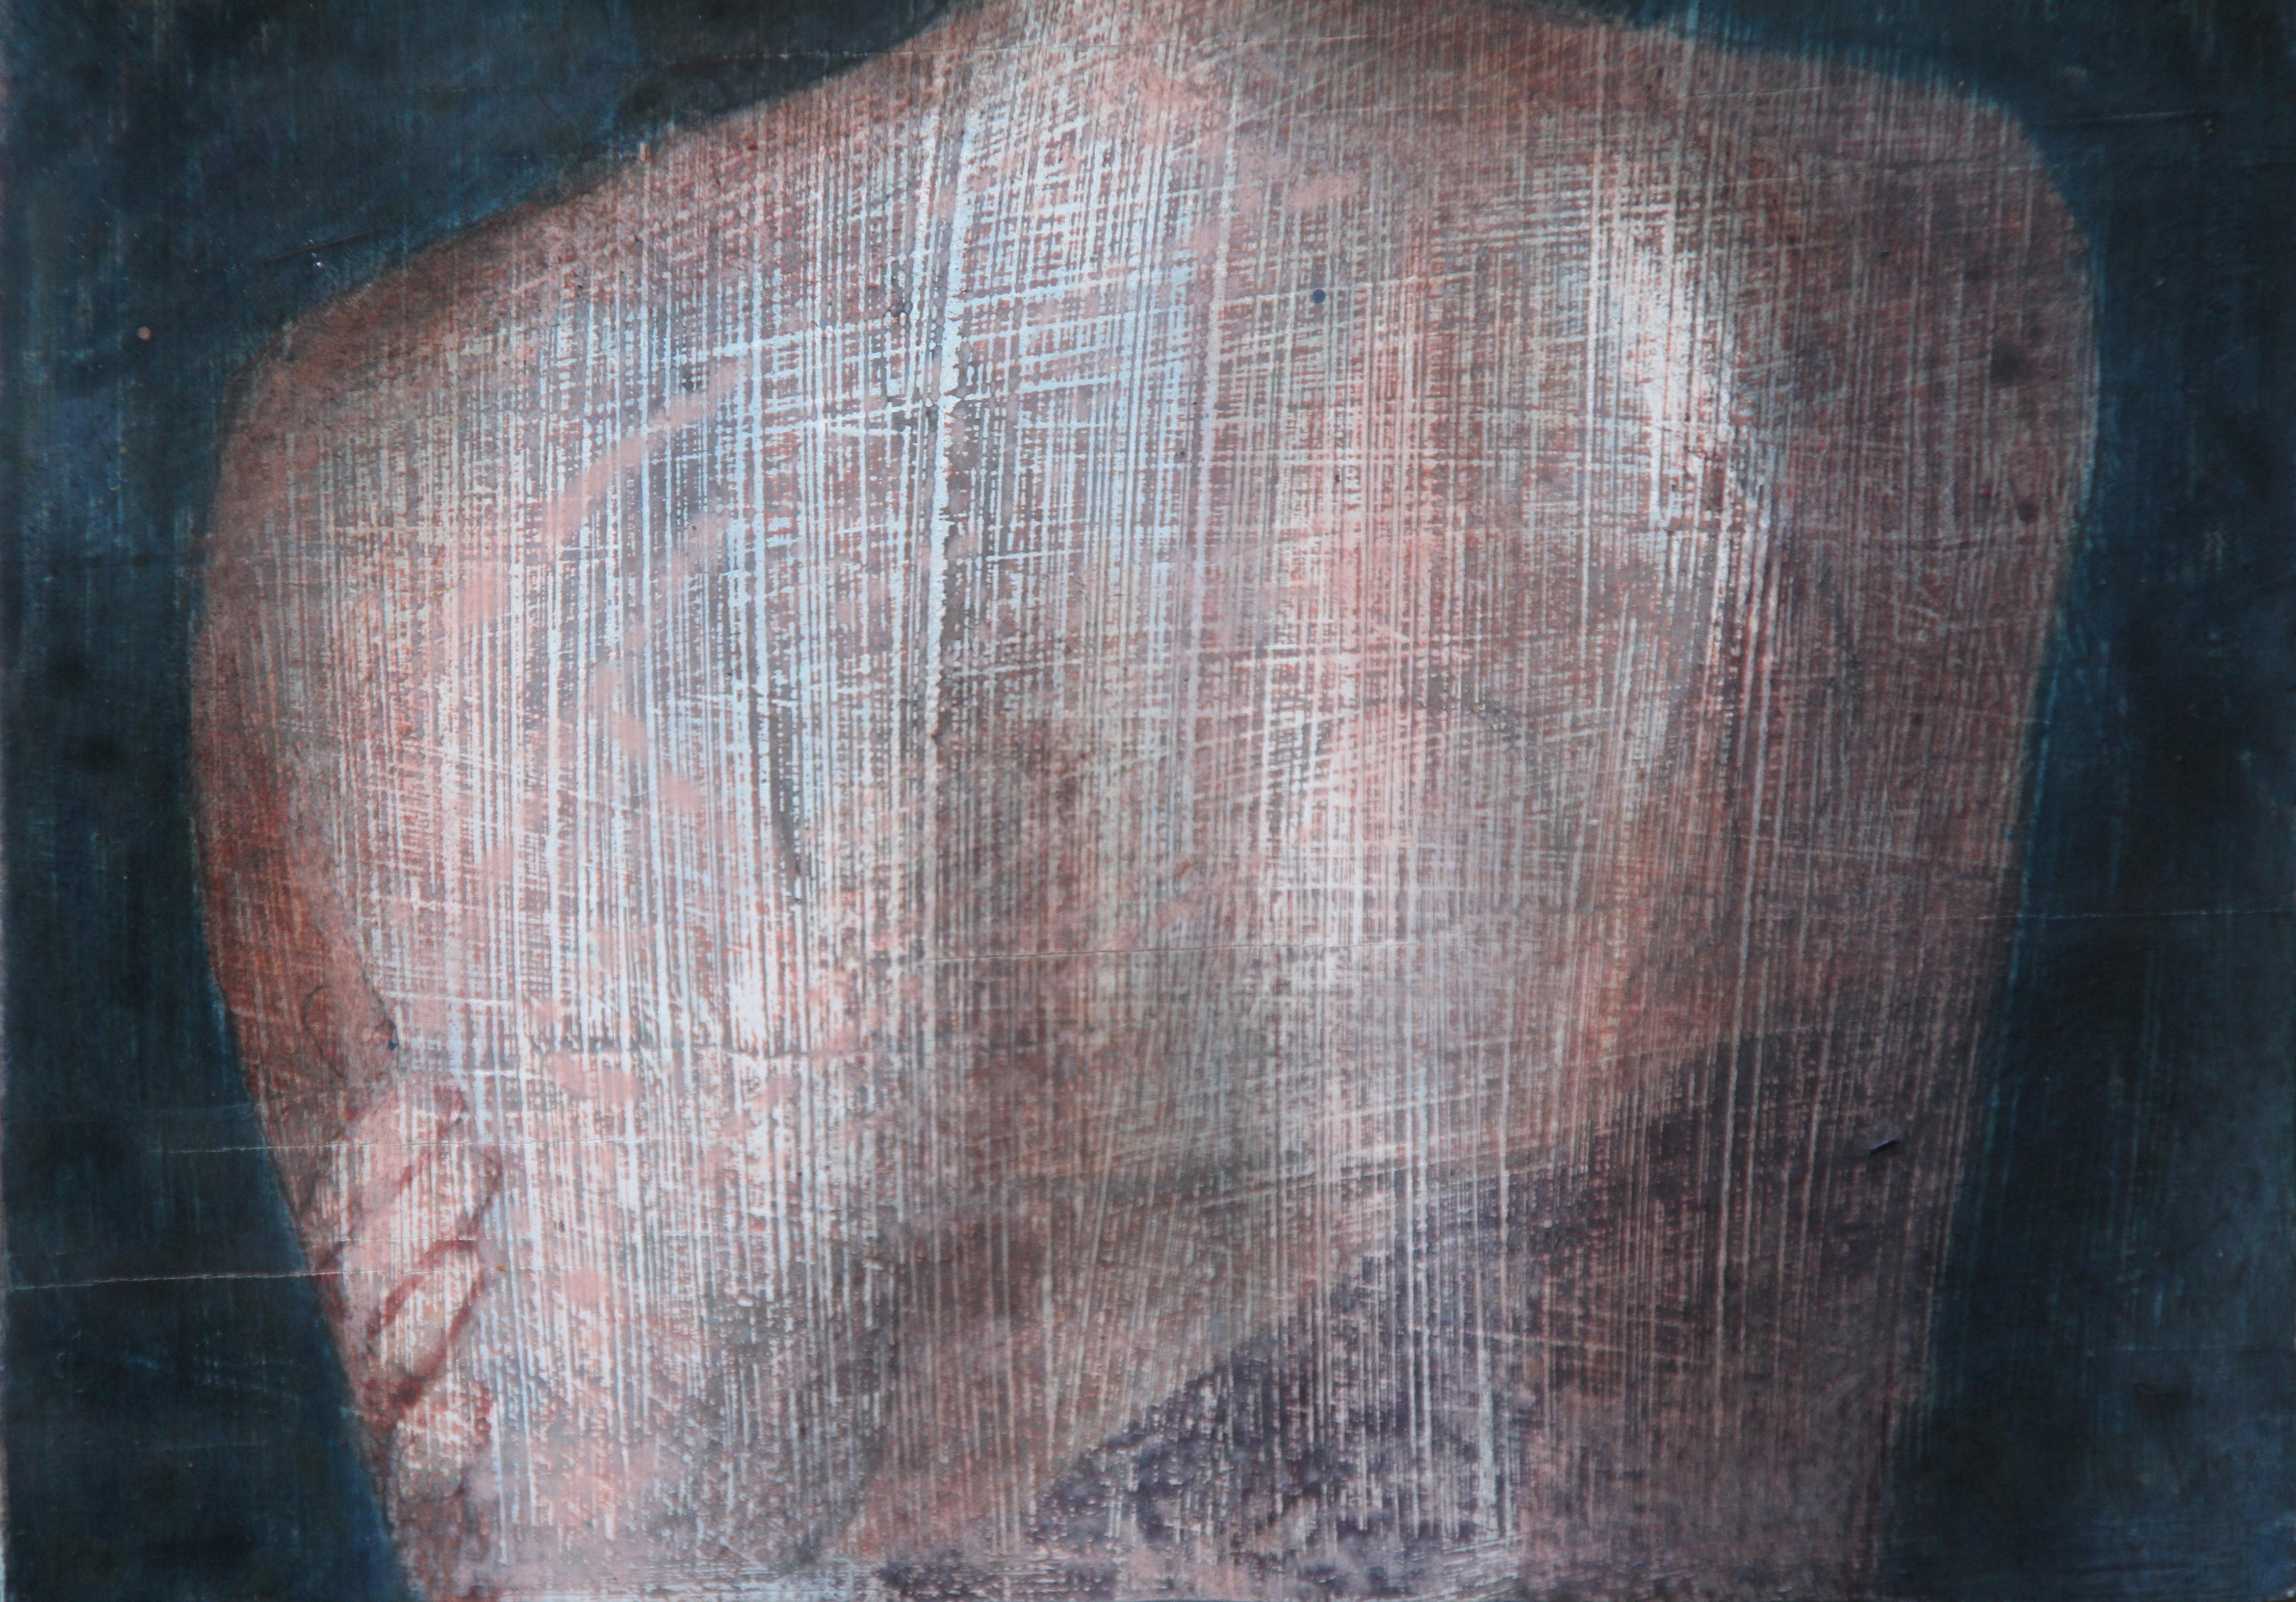 Fragment 9 (dreamy woman back skin female figurative painting soft Earth tones) - Painting by Rudolf Kosow